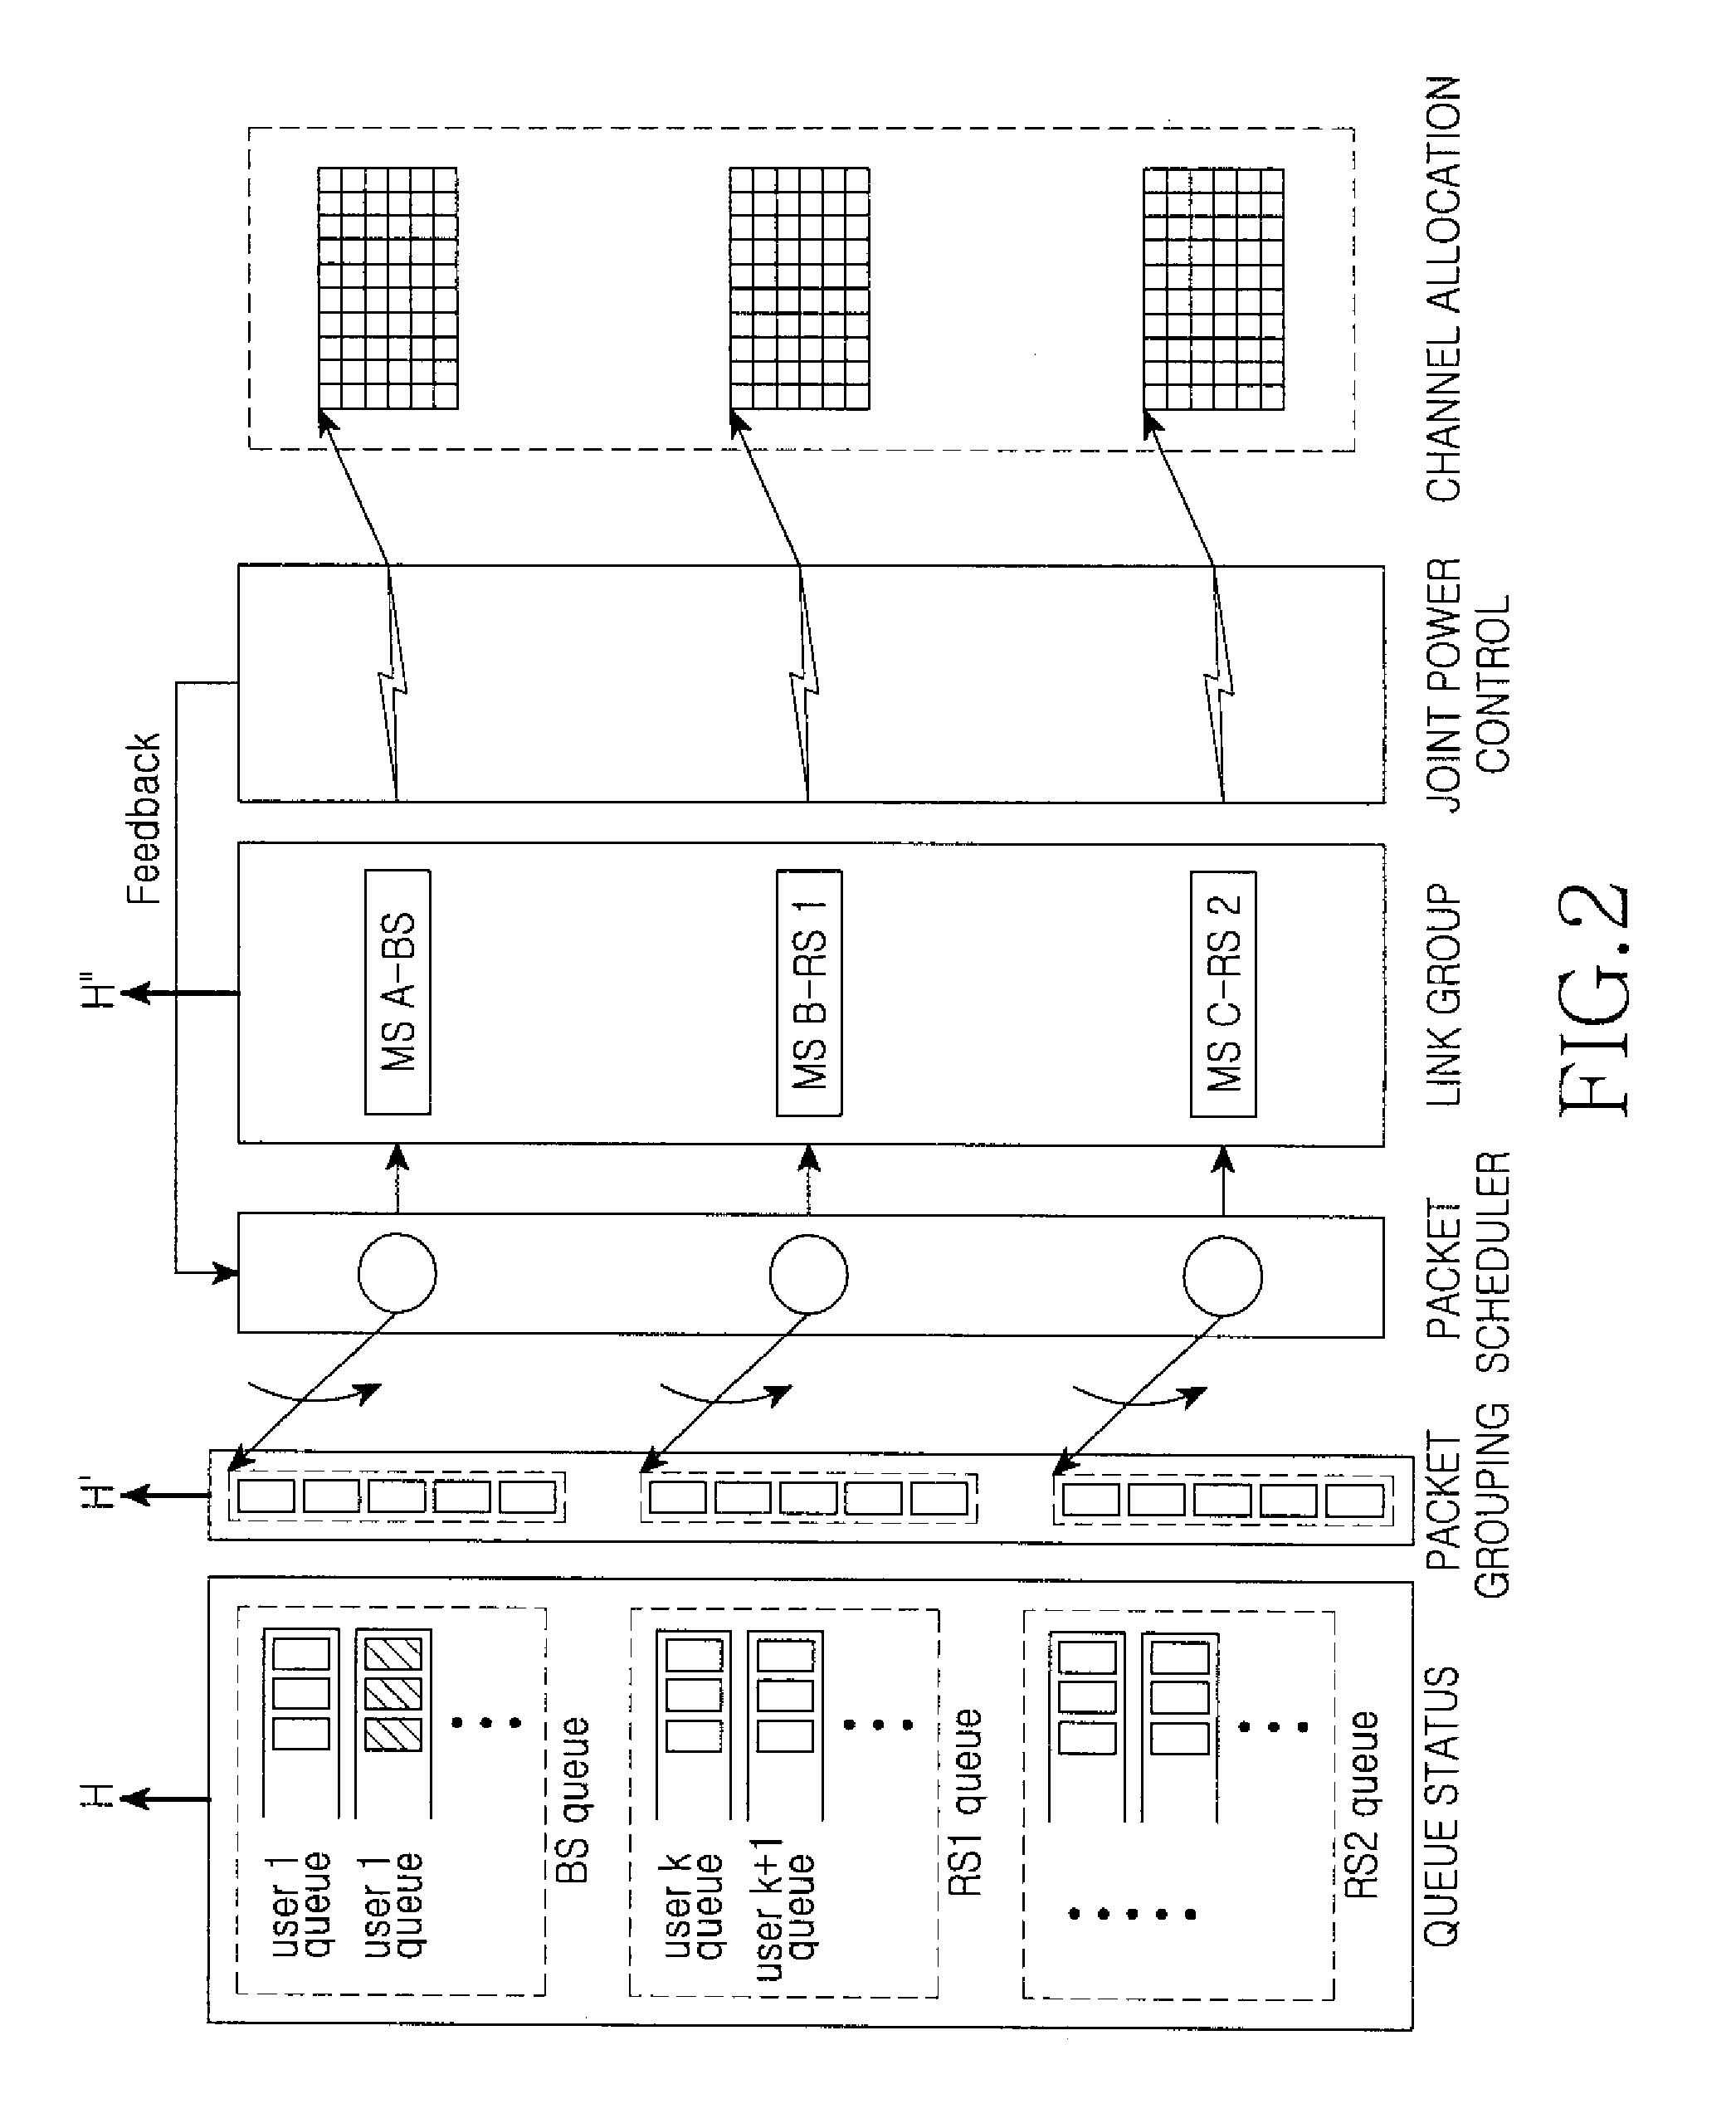 Method and apparatus for joint scheduling to increase frequency efficiency and fairness in a distributed antenna system using frequency reuse and common power control